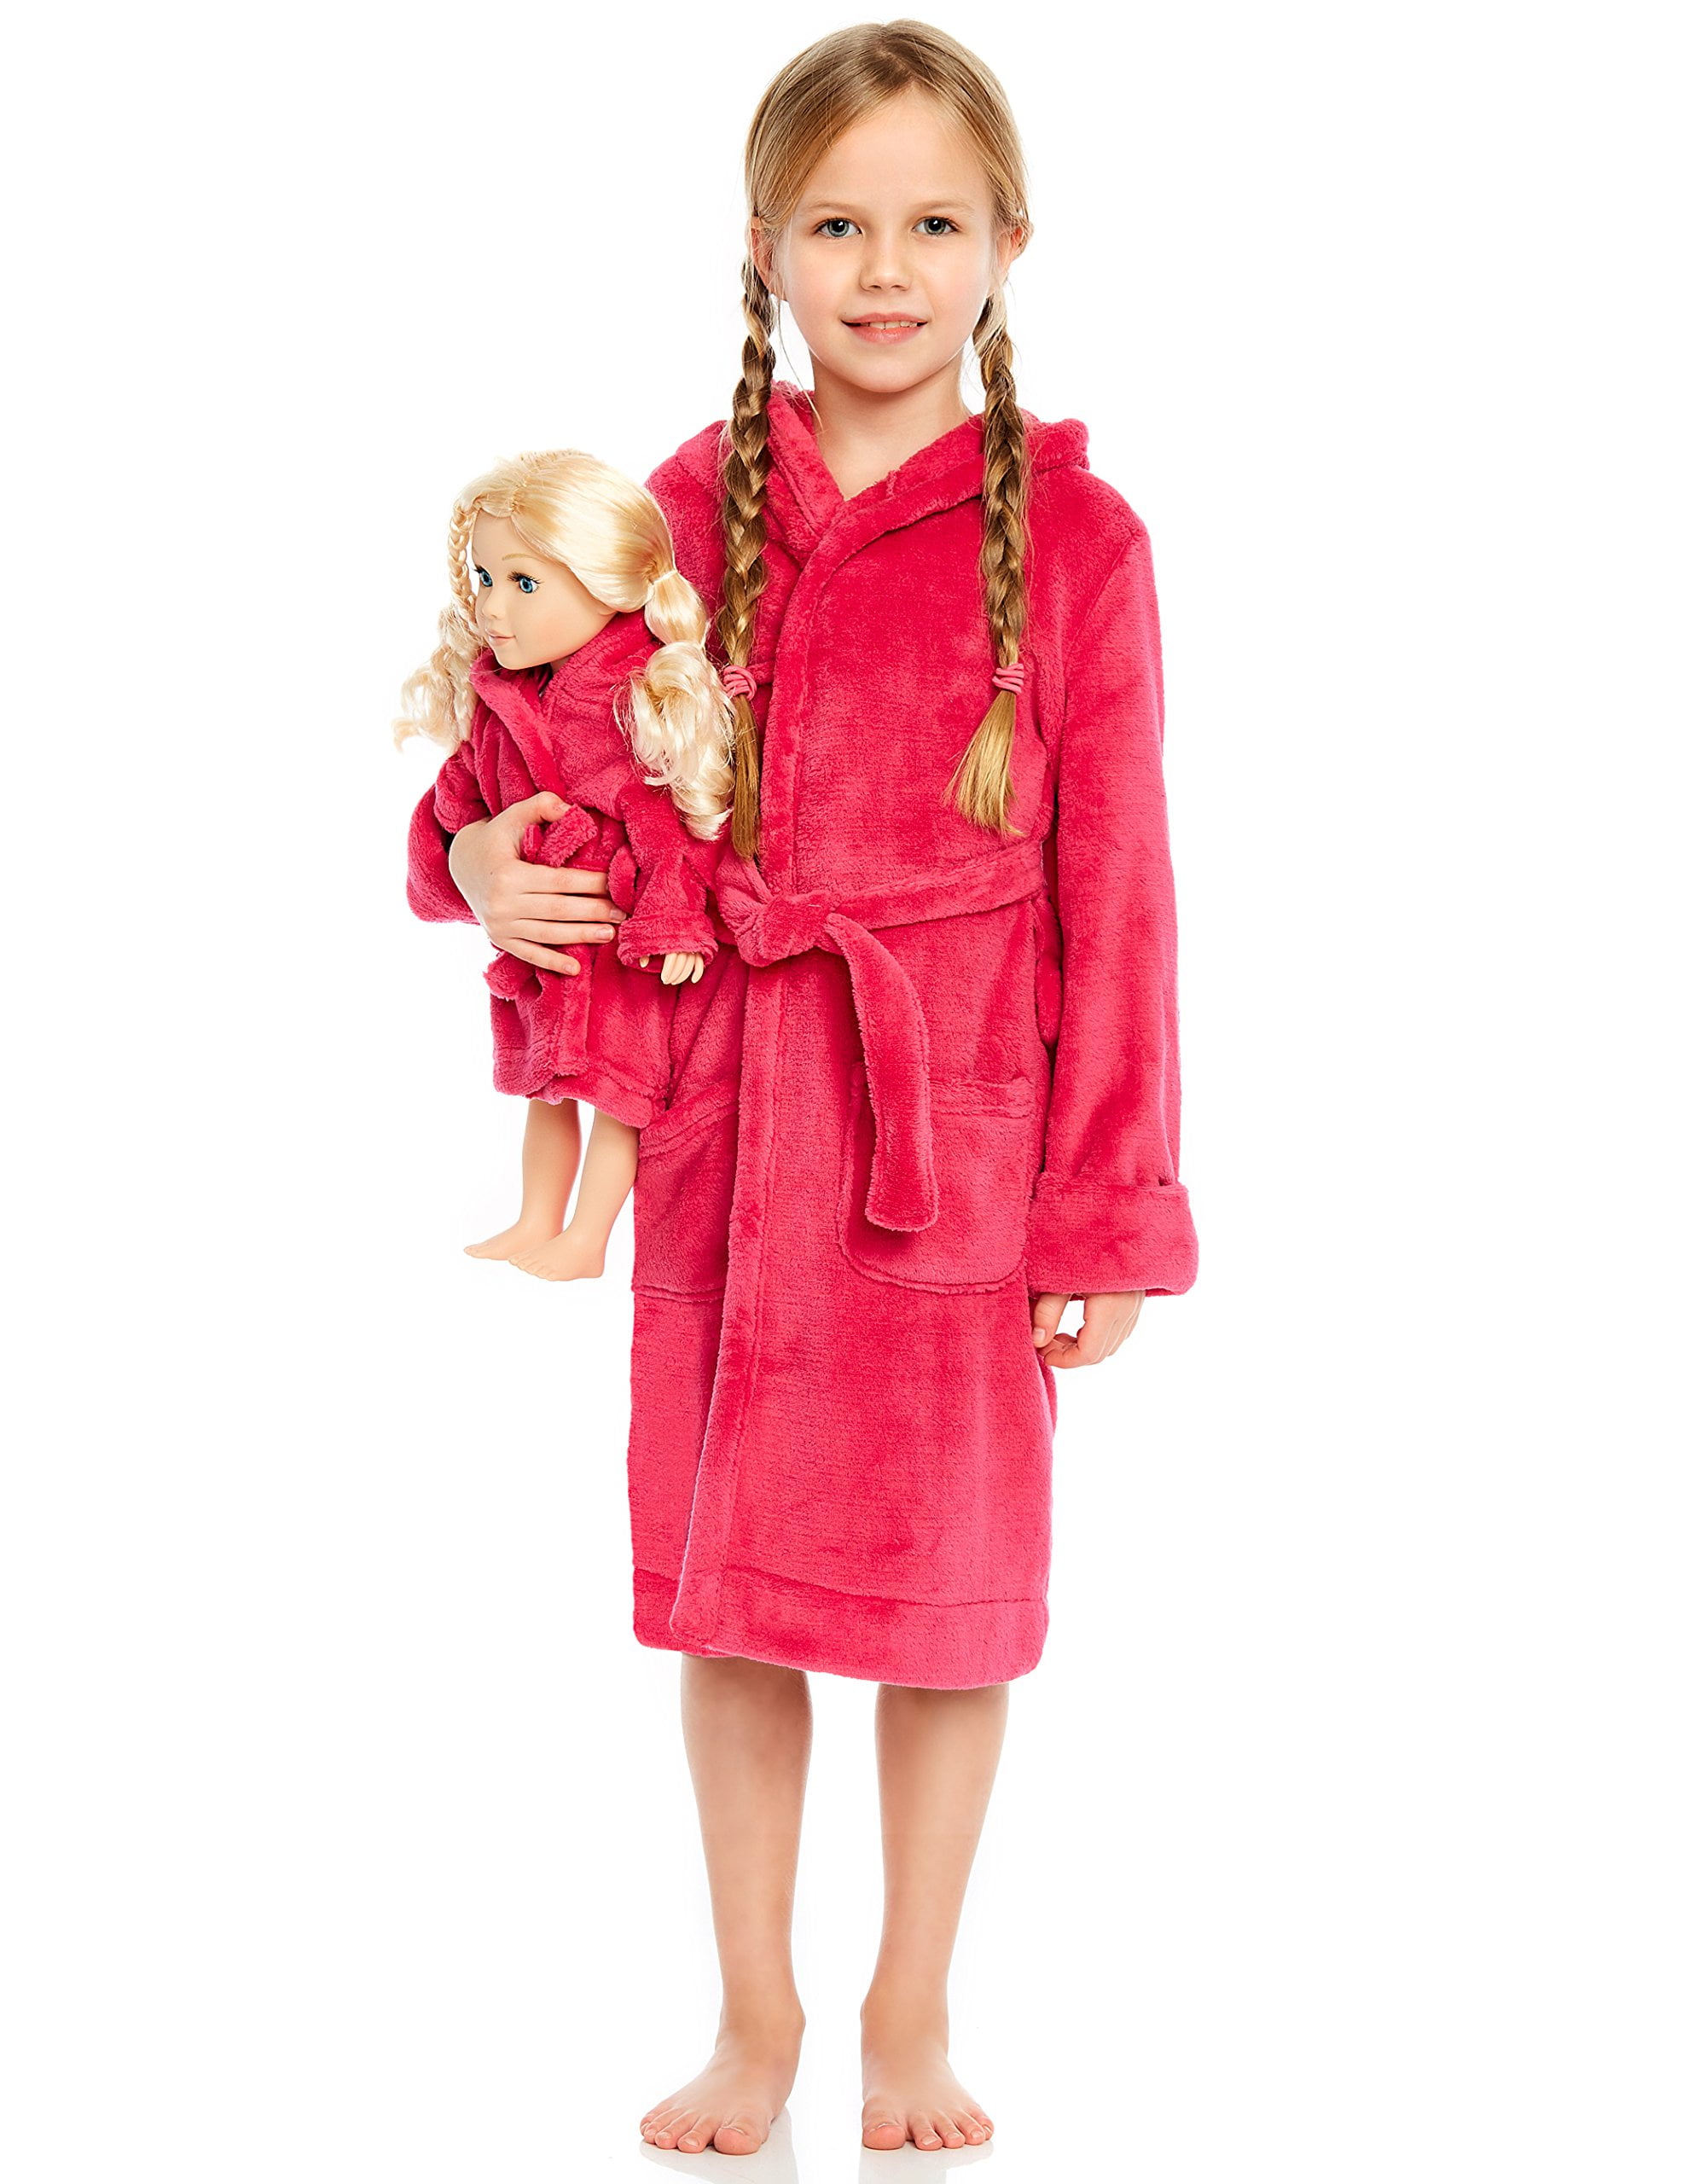 Hot Pink Robe Bathrobe for American Girl 18"Doll Clothes  Most Variety